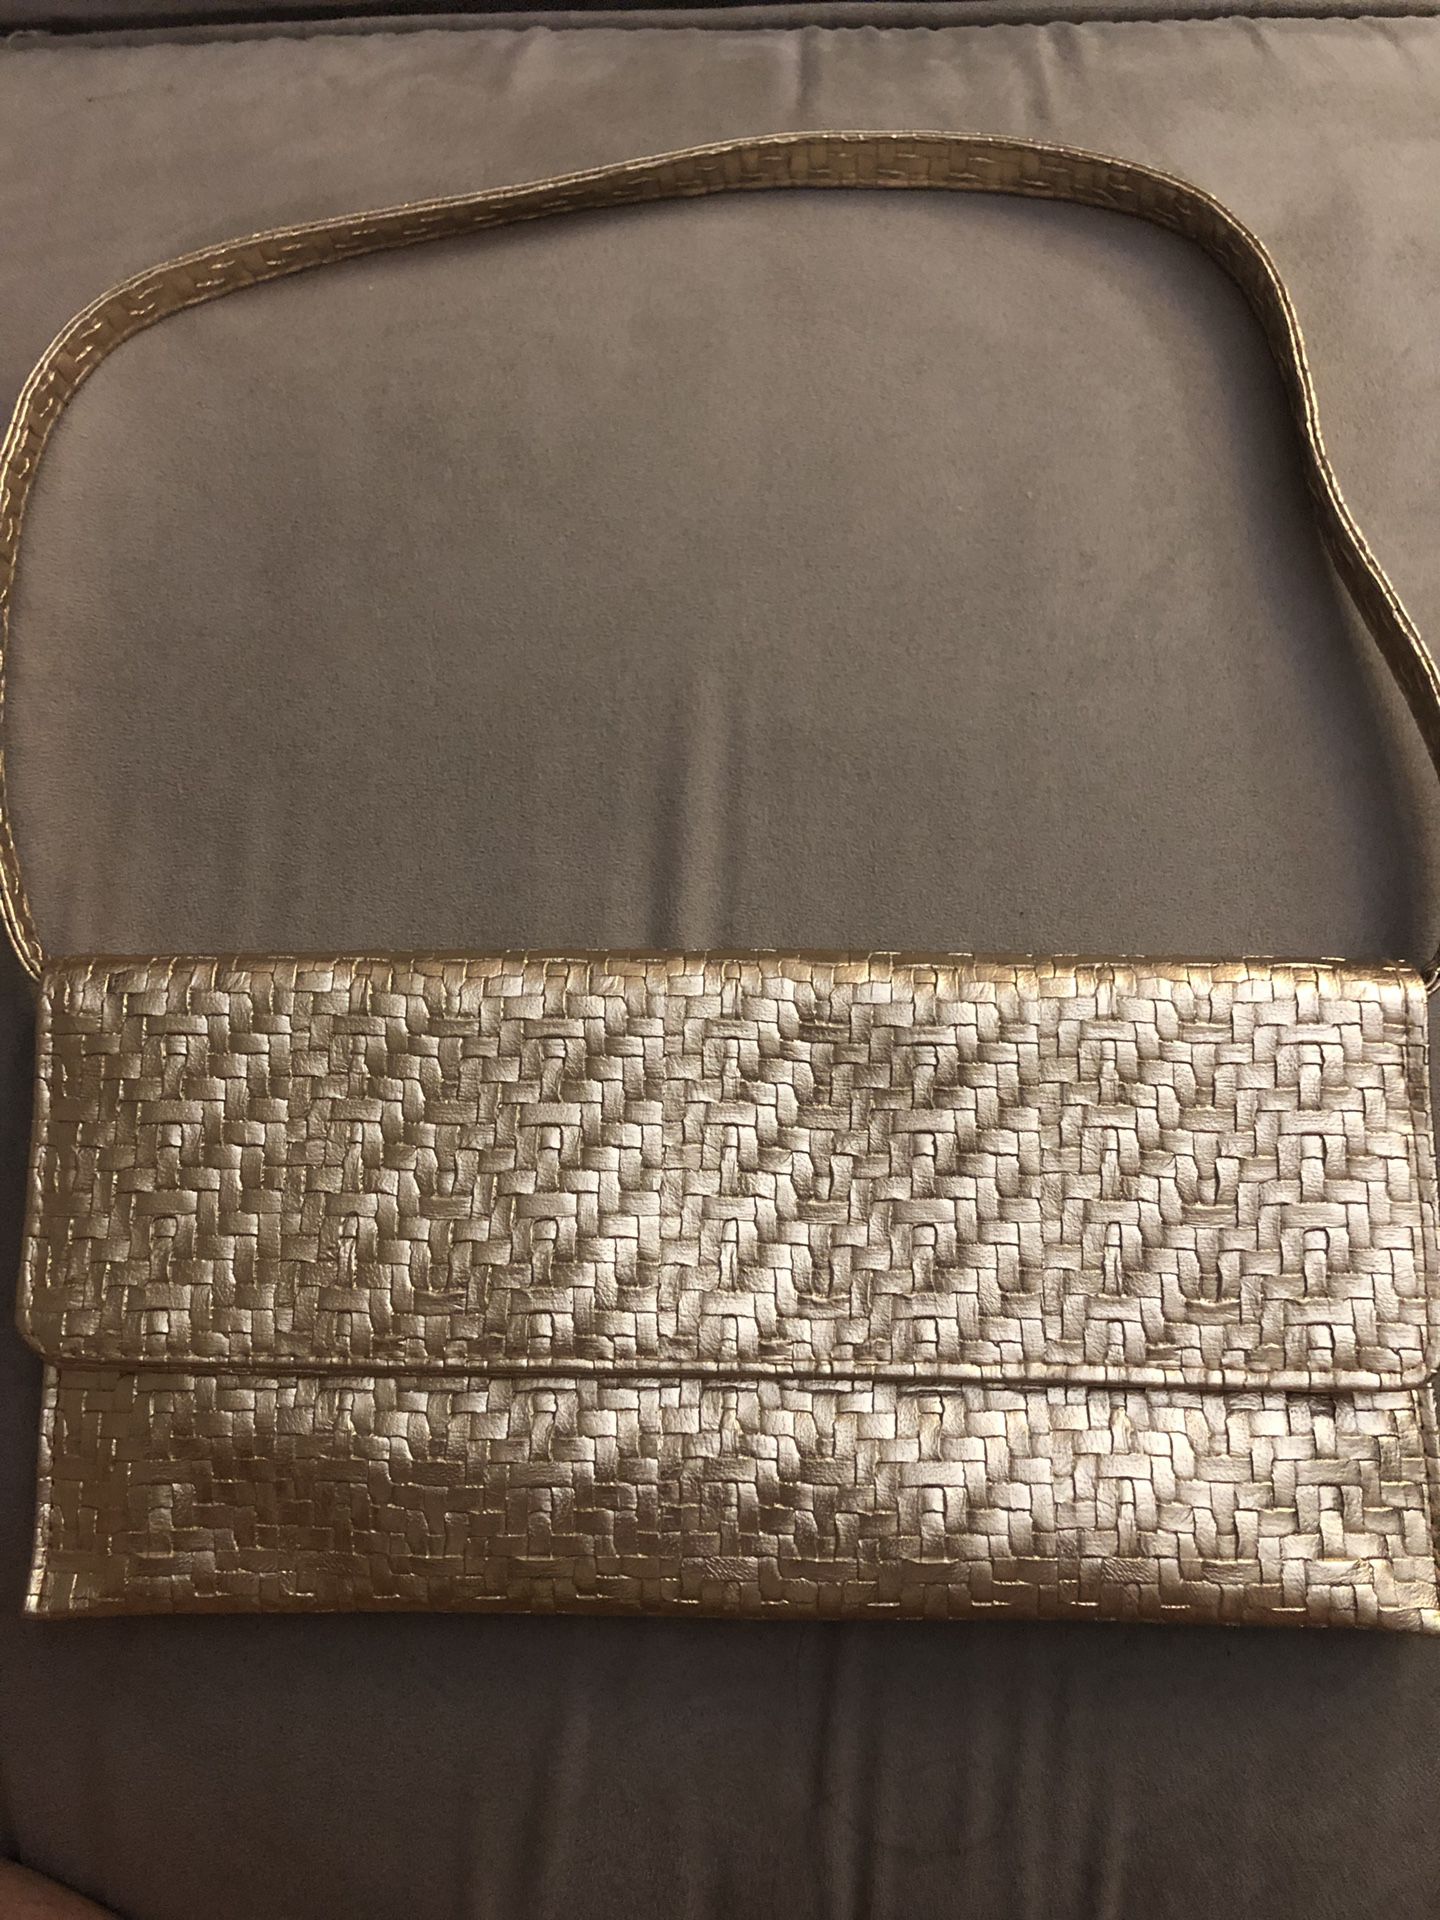 Clutch or handbag (gold color) really cute and versatile